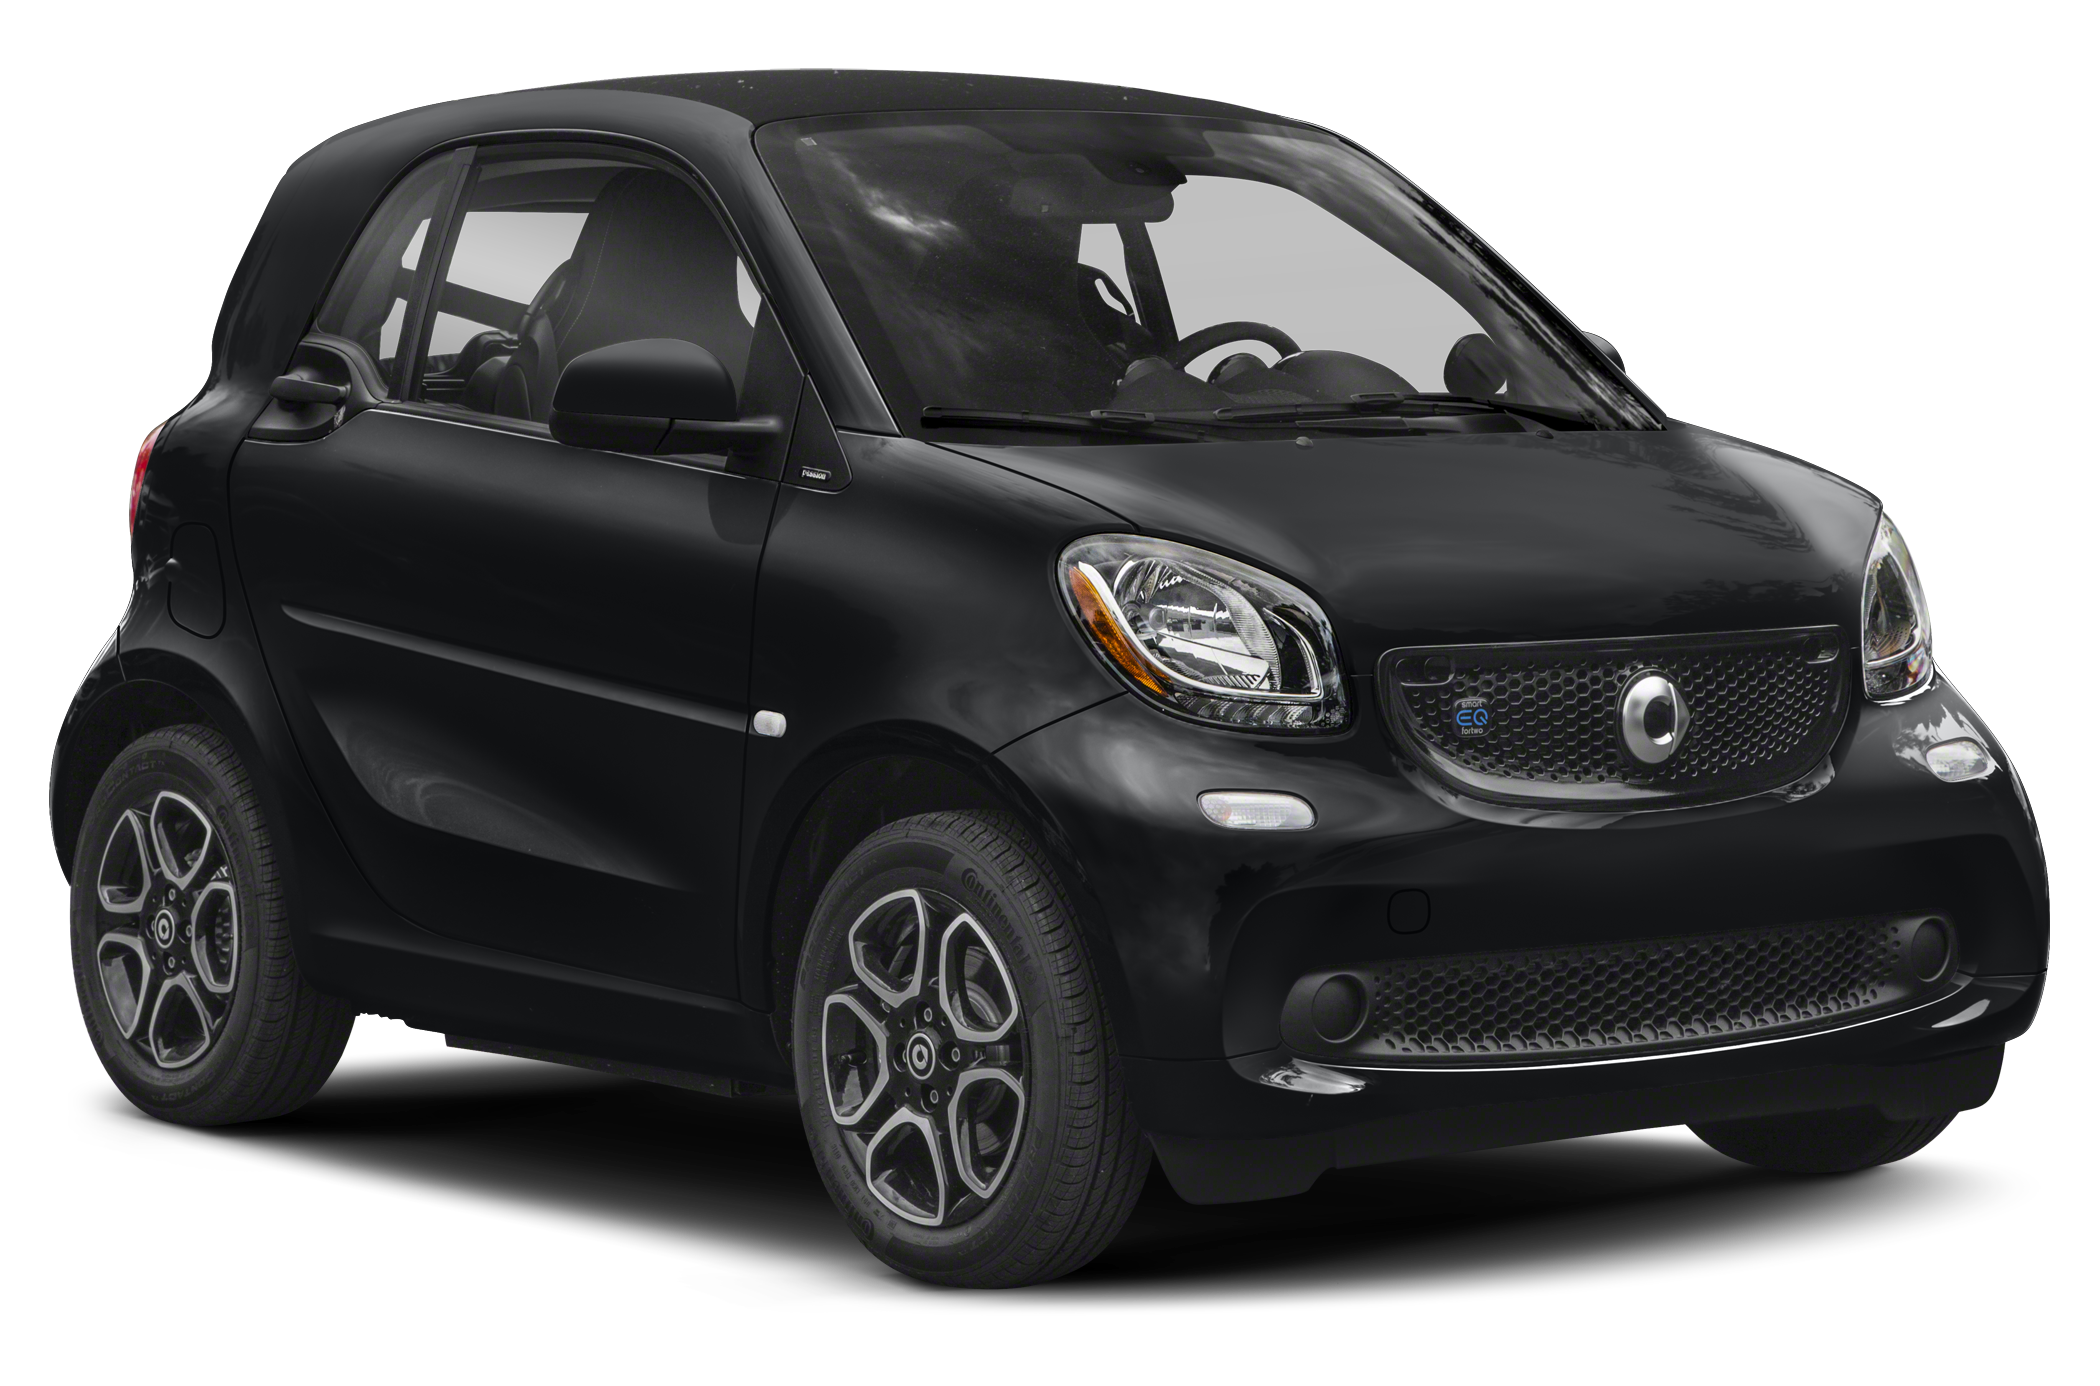 How to distinguish different Smart Fortwo generations, by Slawa